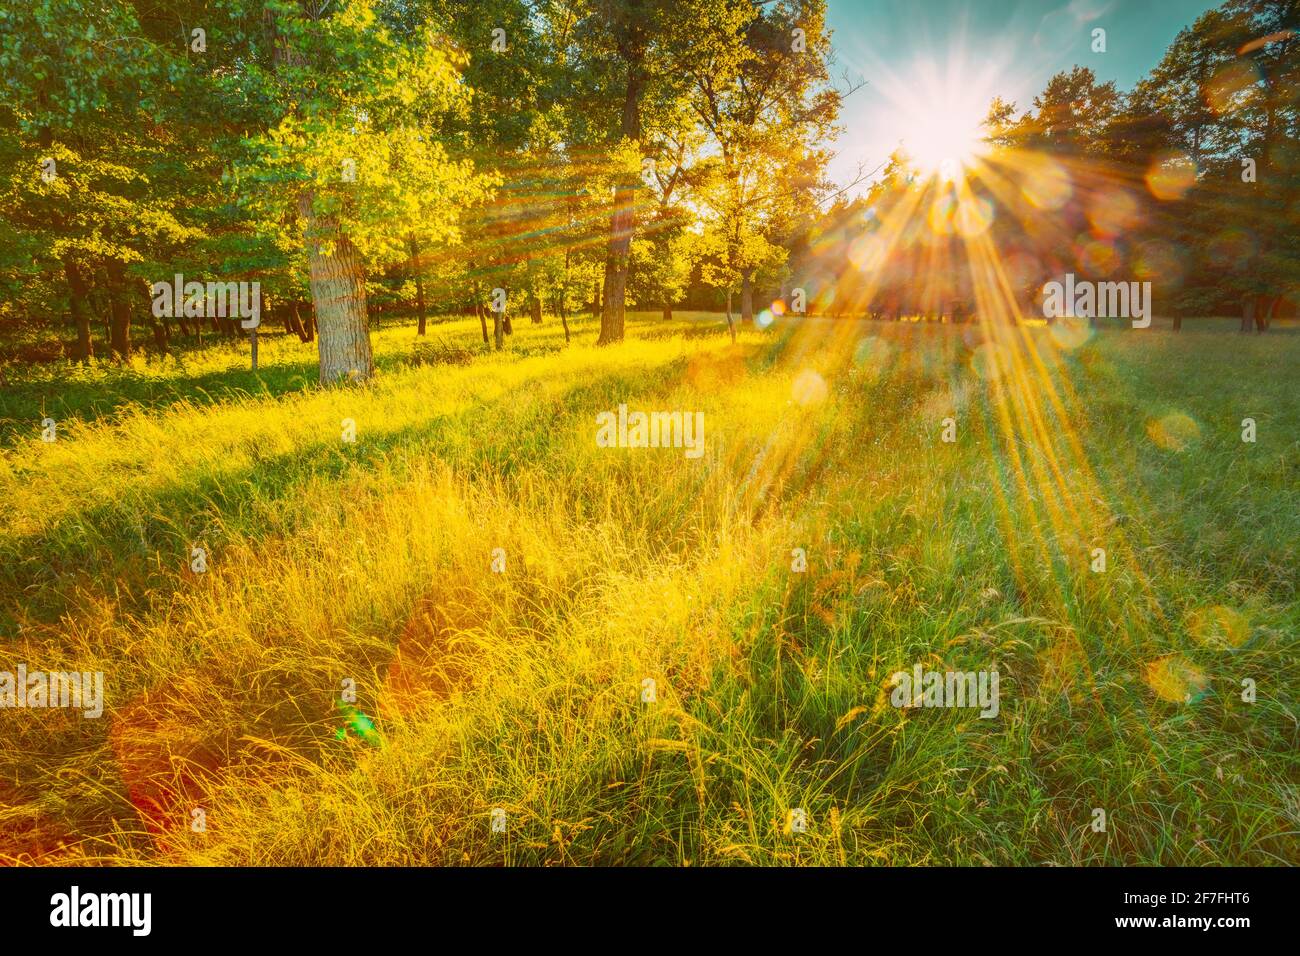 Sun Shining Through Greenery Foliage In Green Park Over Fresh Grass. Summer Sunny Forest Trees. Natural Woods In Sunlight. Stock Photo